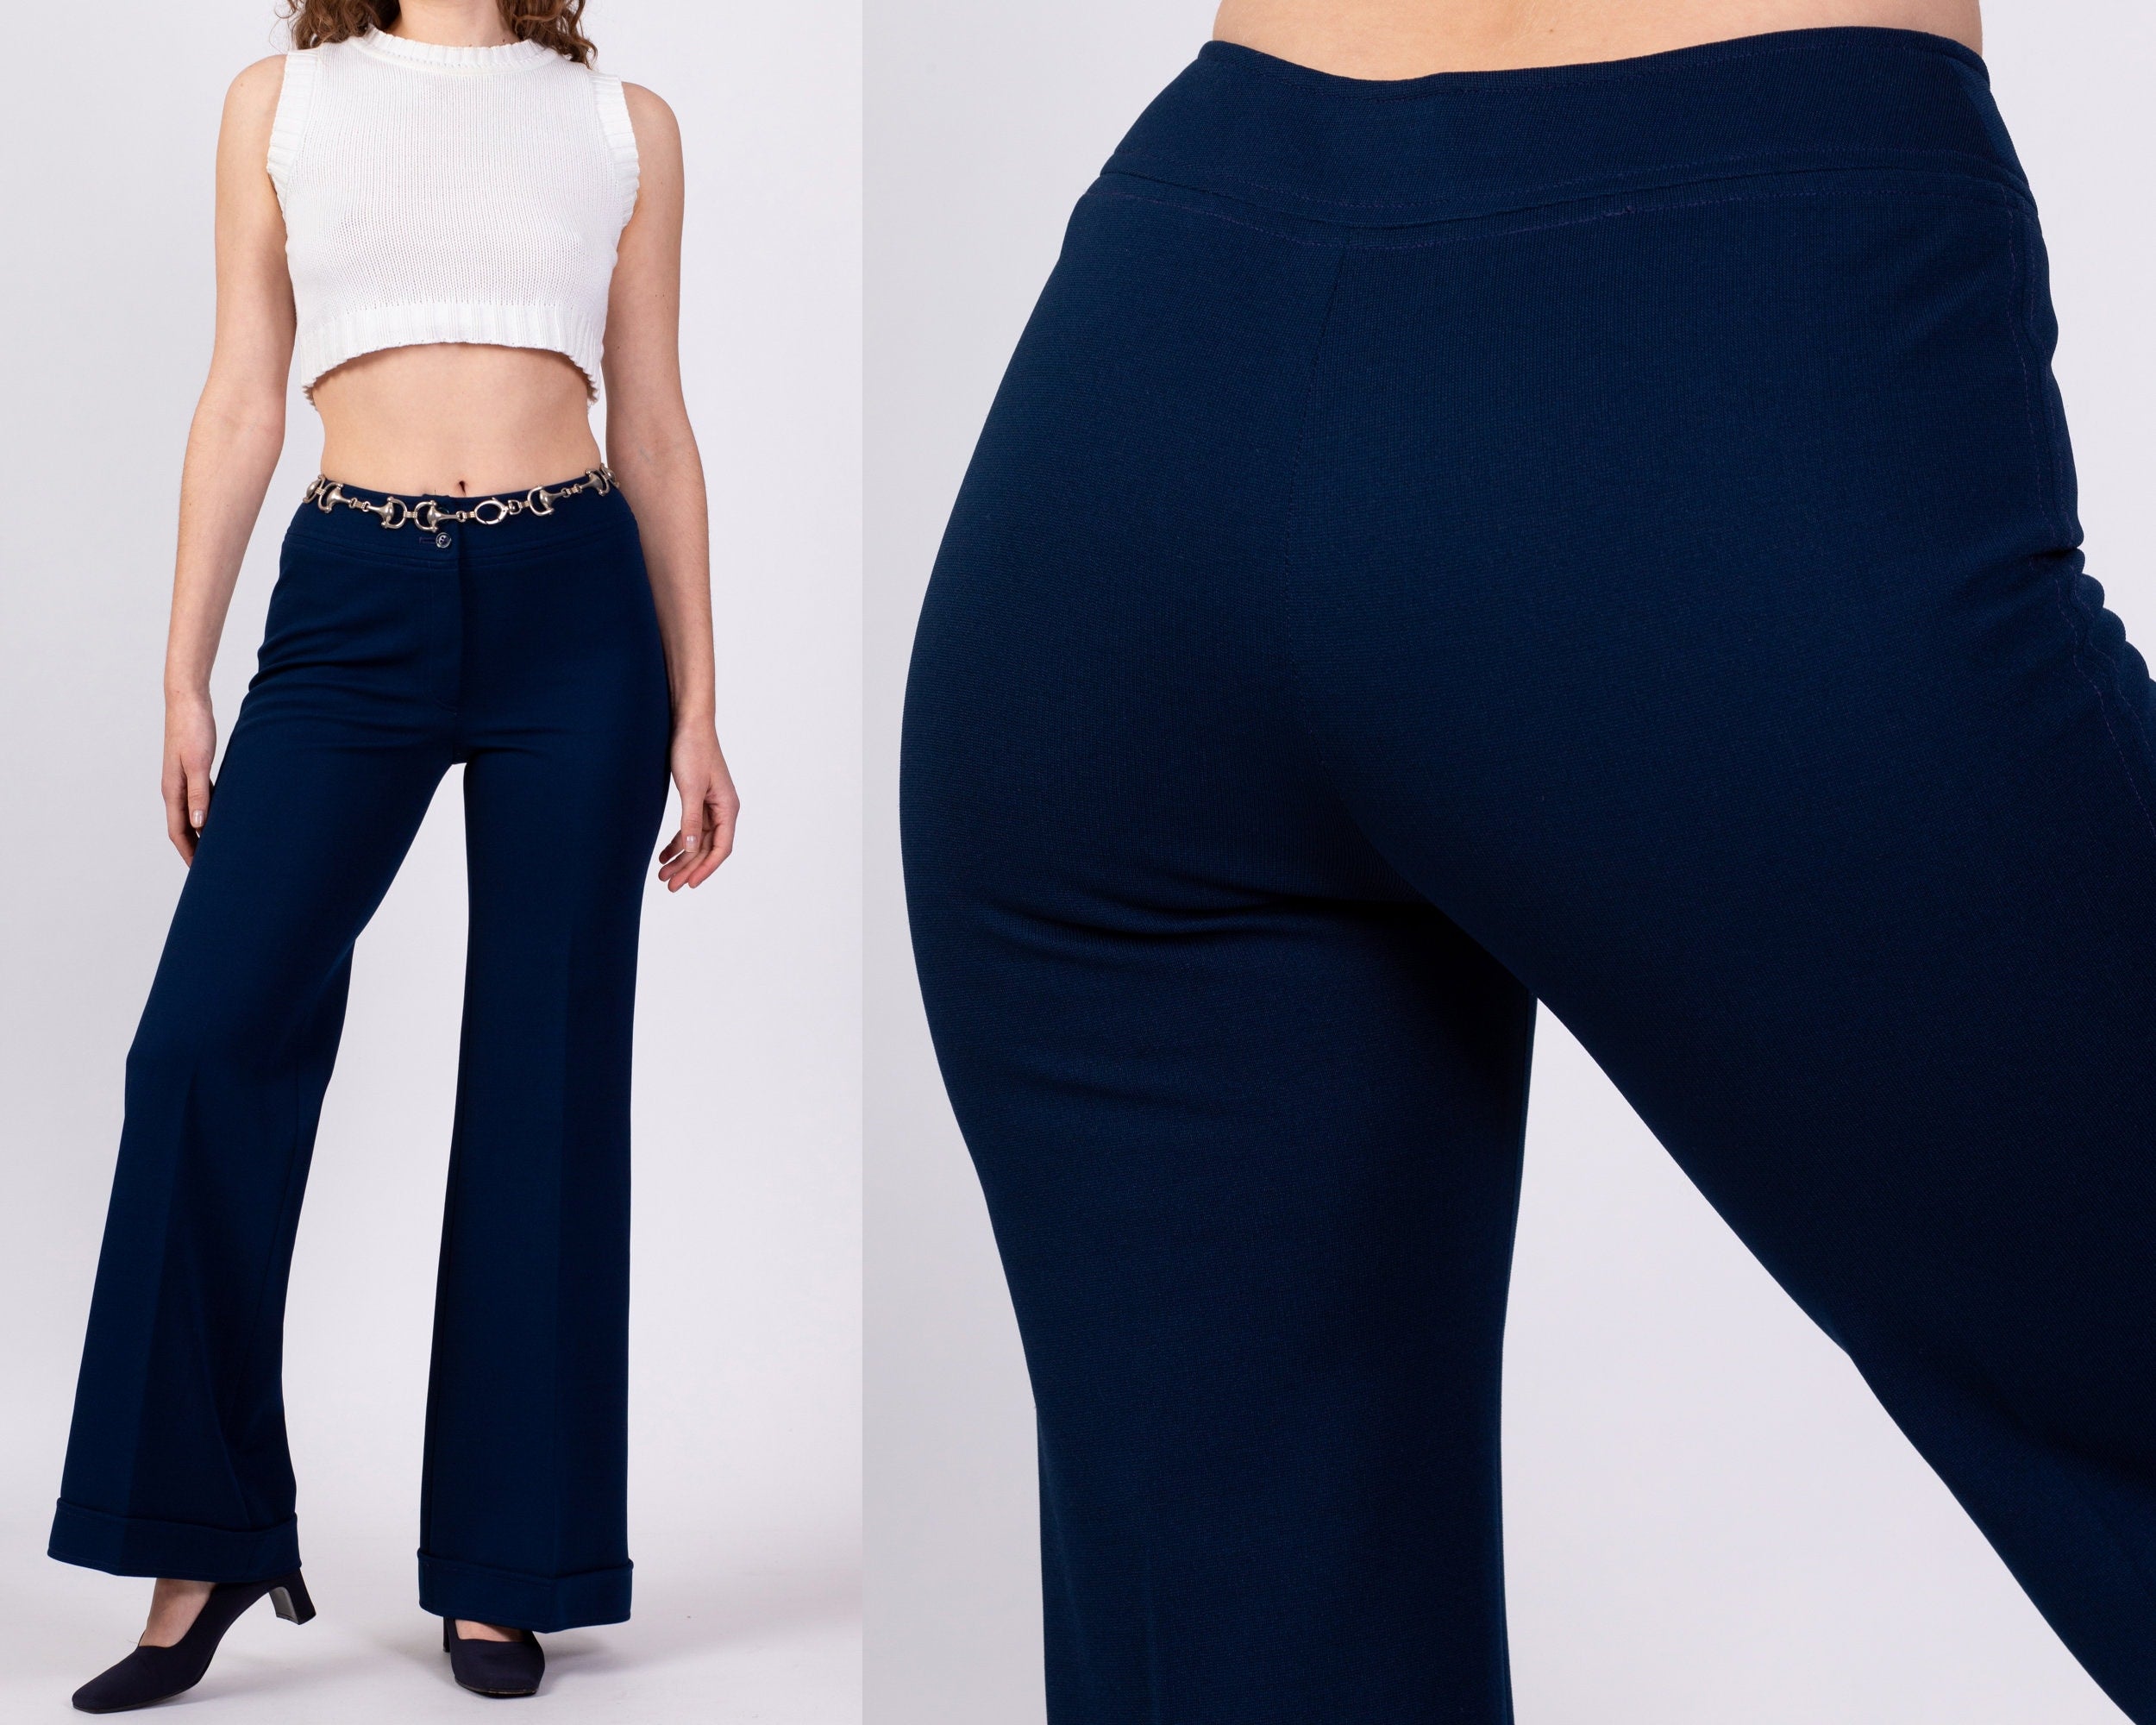 Dunkirk - High-waisted cigarette trousers in navy - Frey Tailored